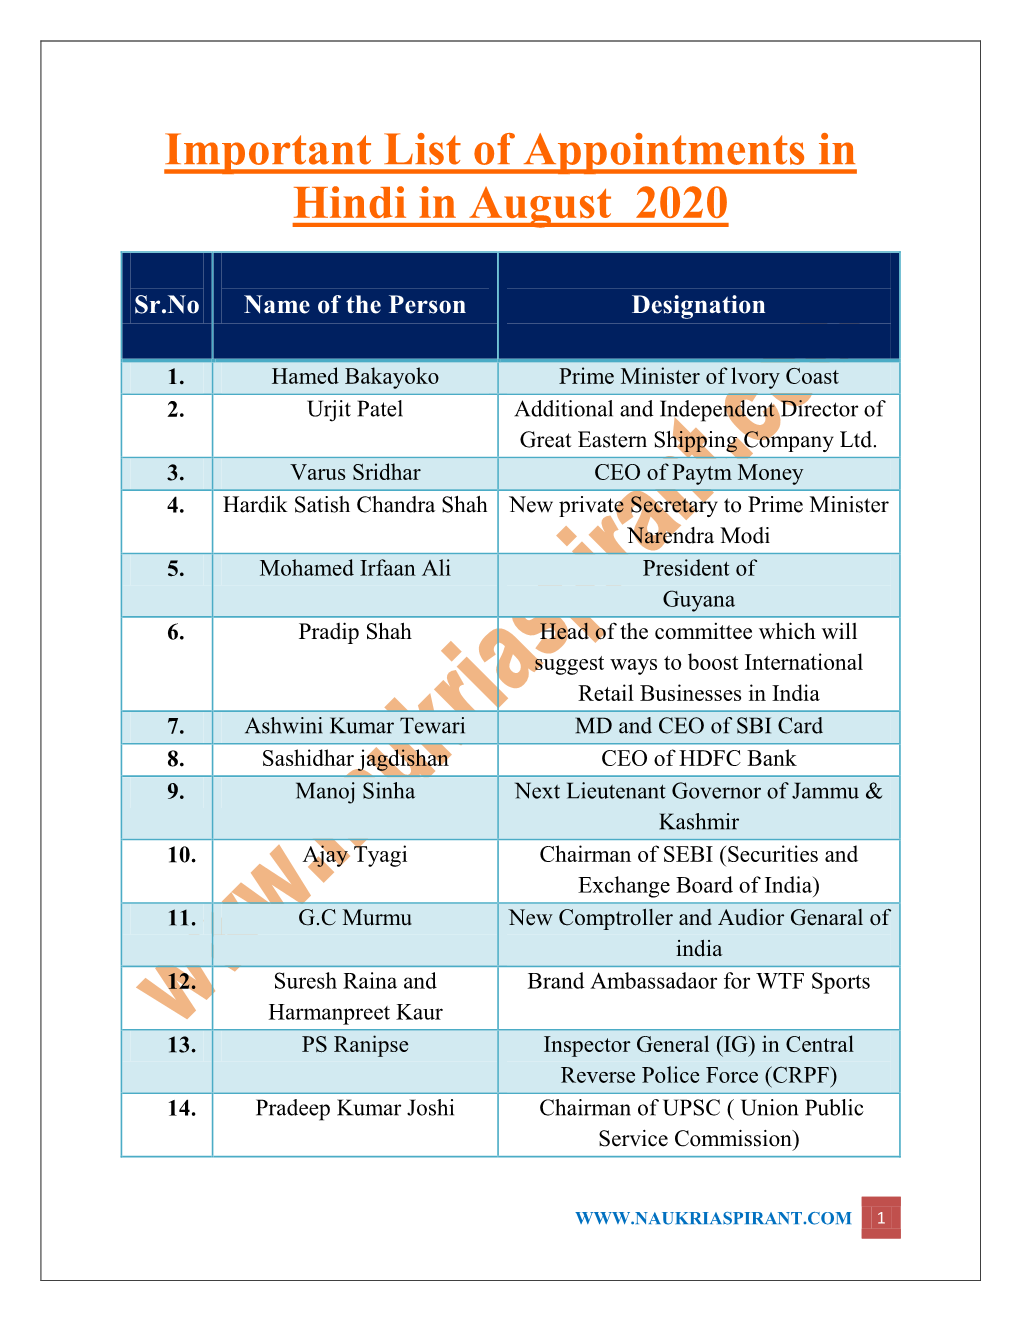 Important List of Appointments in Hindi in August 2020